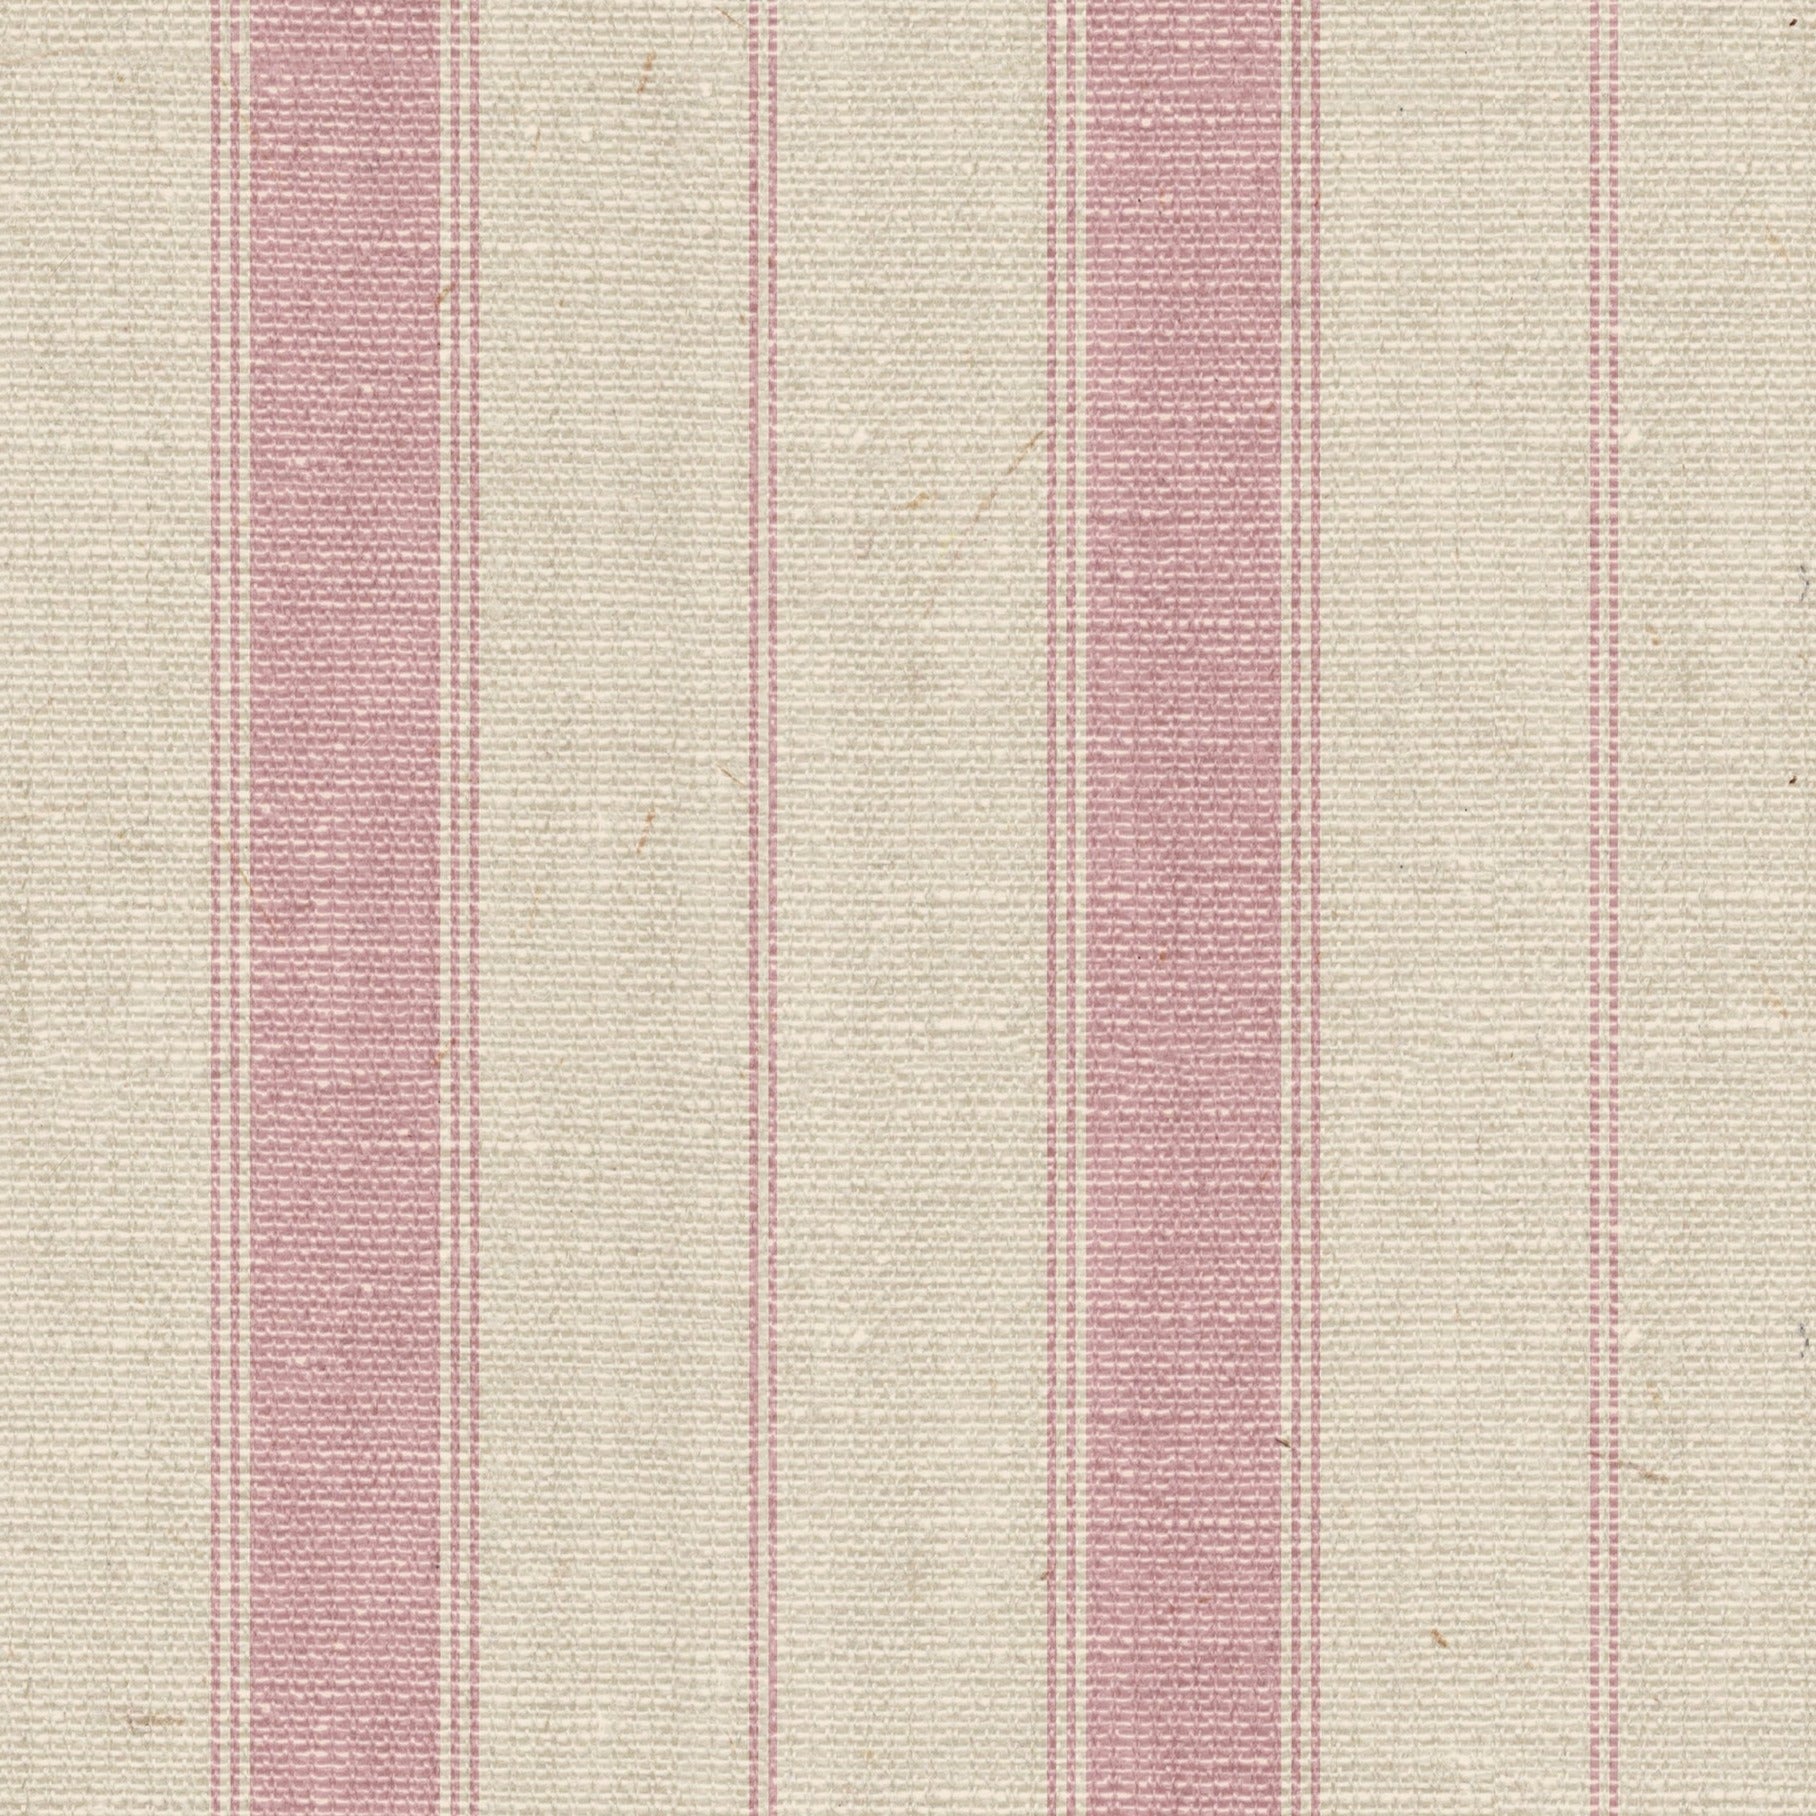 Textured wallpaper with vertical stripes in soft beige and muted pink tones, giving a subtle and elegant appearance suitable for sophisticated interior decor.